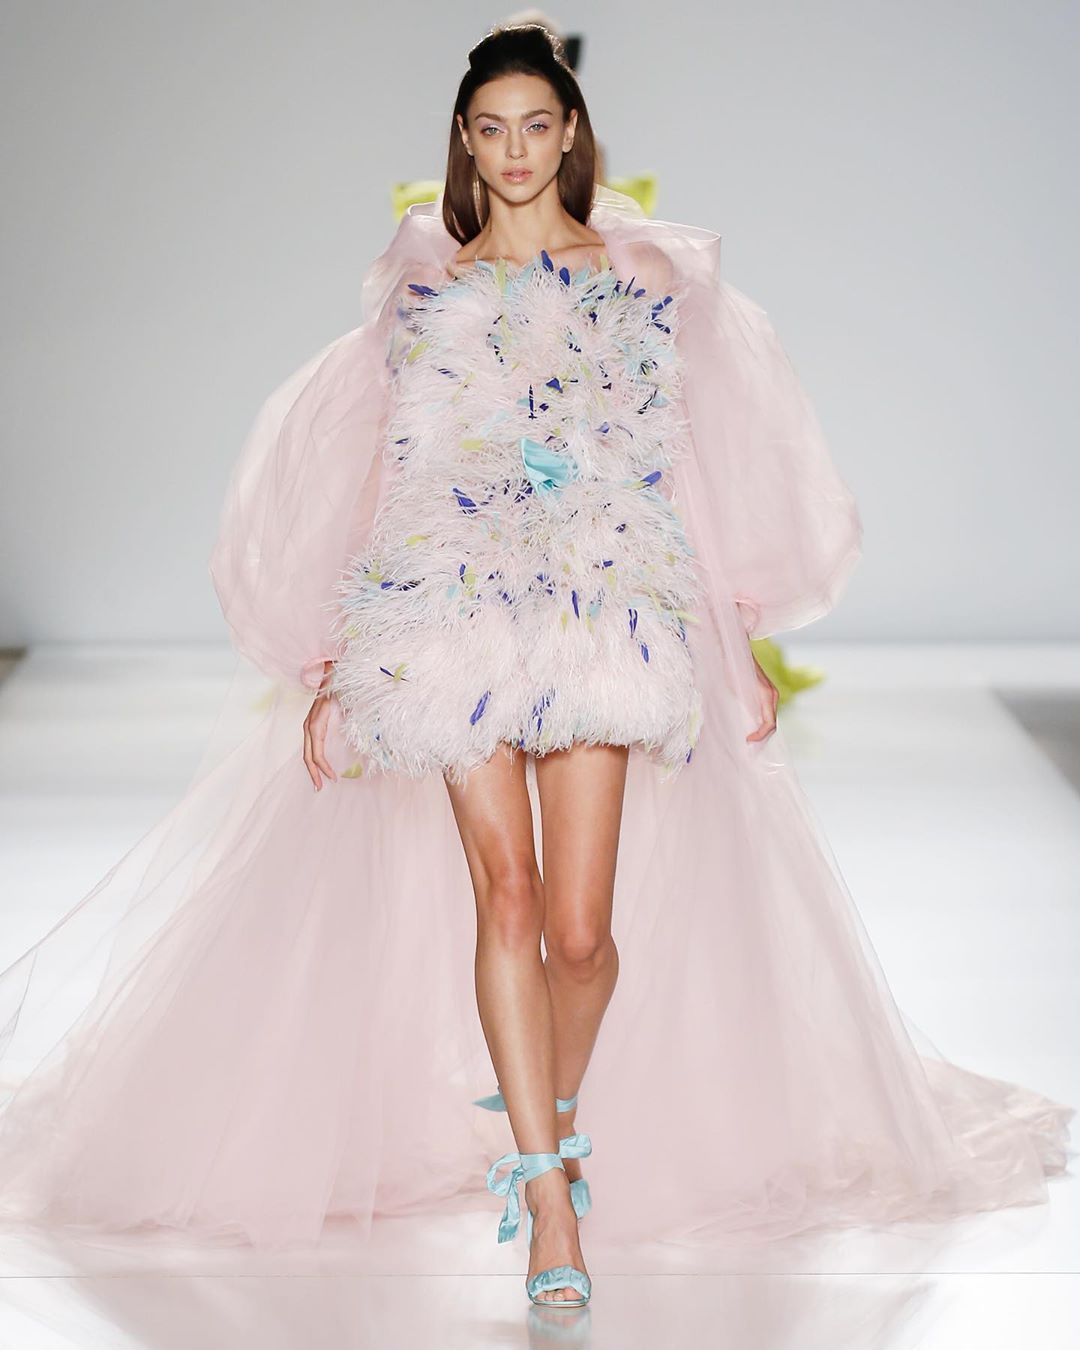 Ralph & Russo Spring 2020 Couture. Paris Fashion Week | Cool Chic Style ...